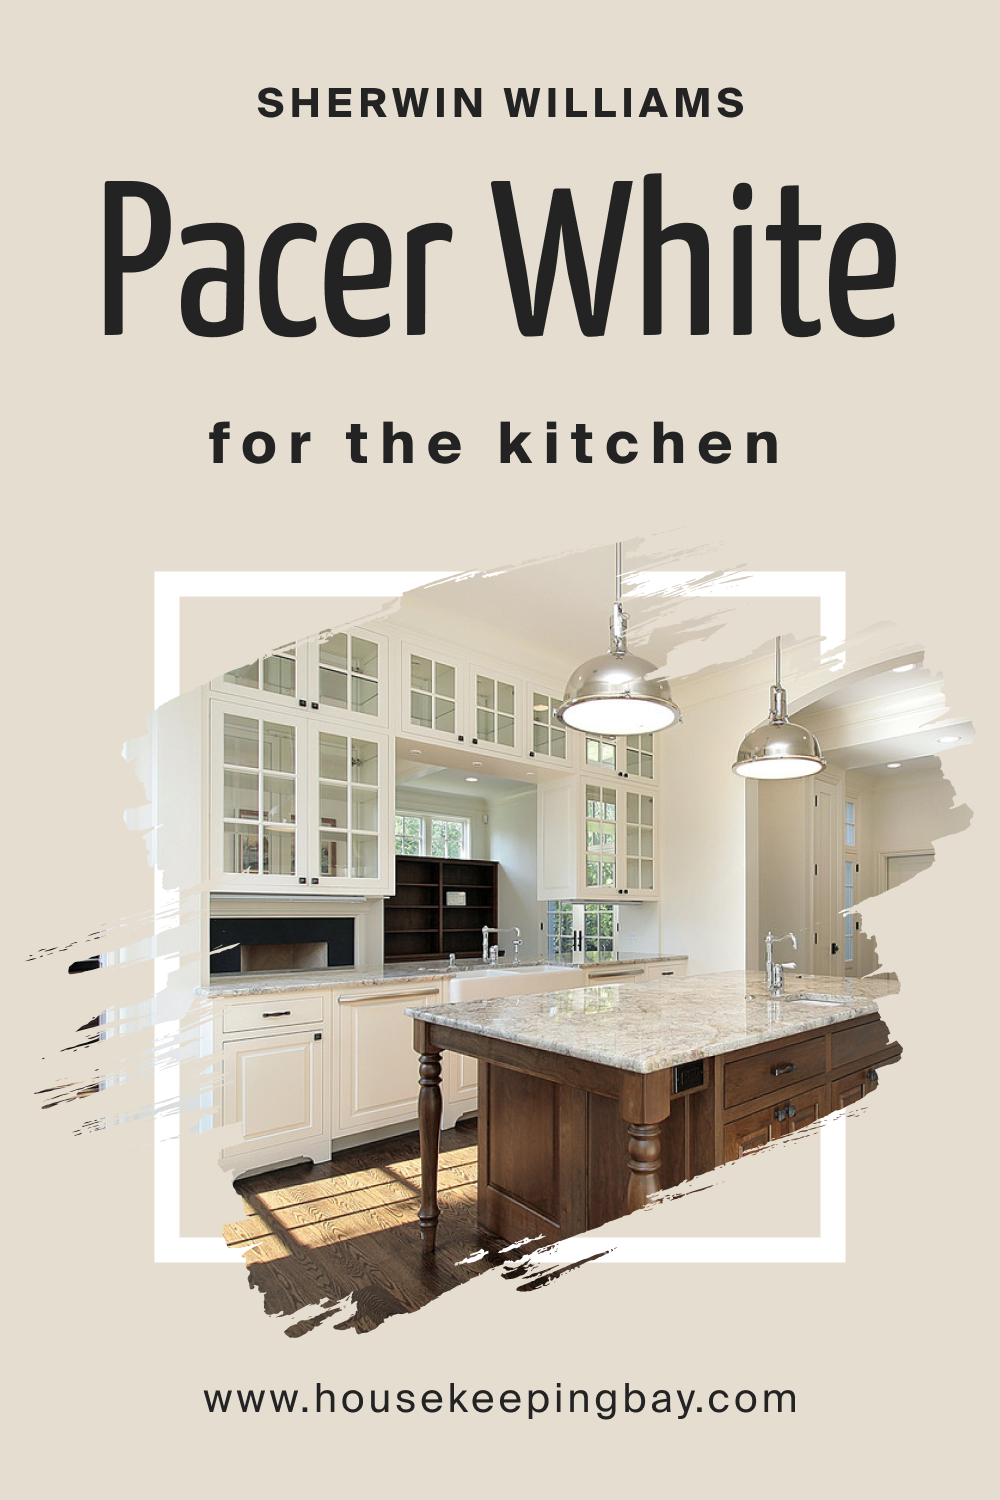 Sherwin Williams. SW Pacer White For the Kitchen